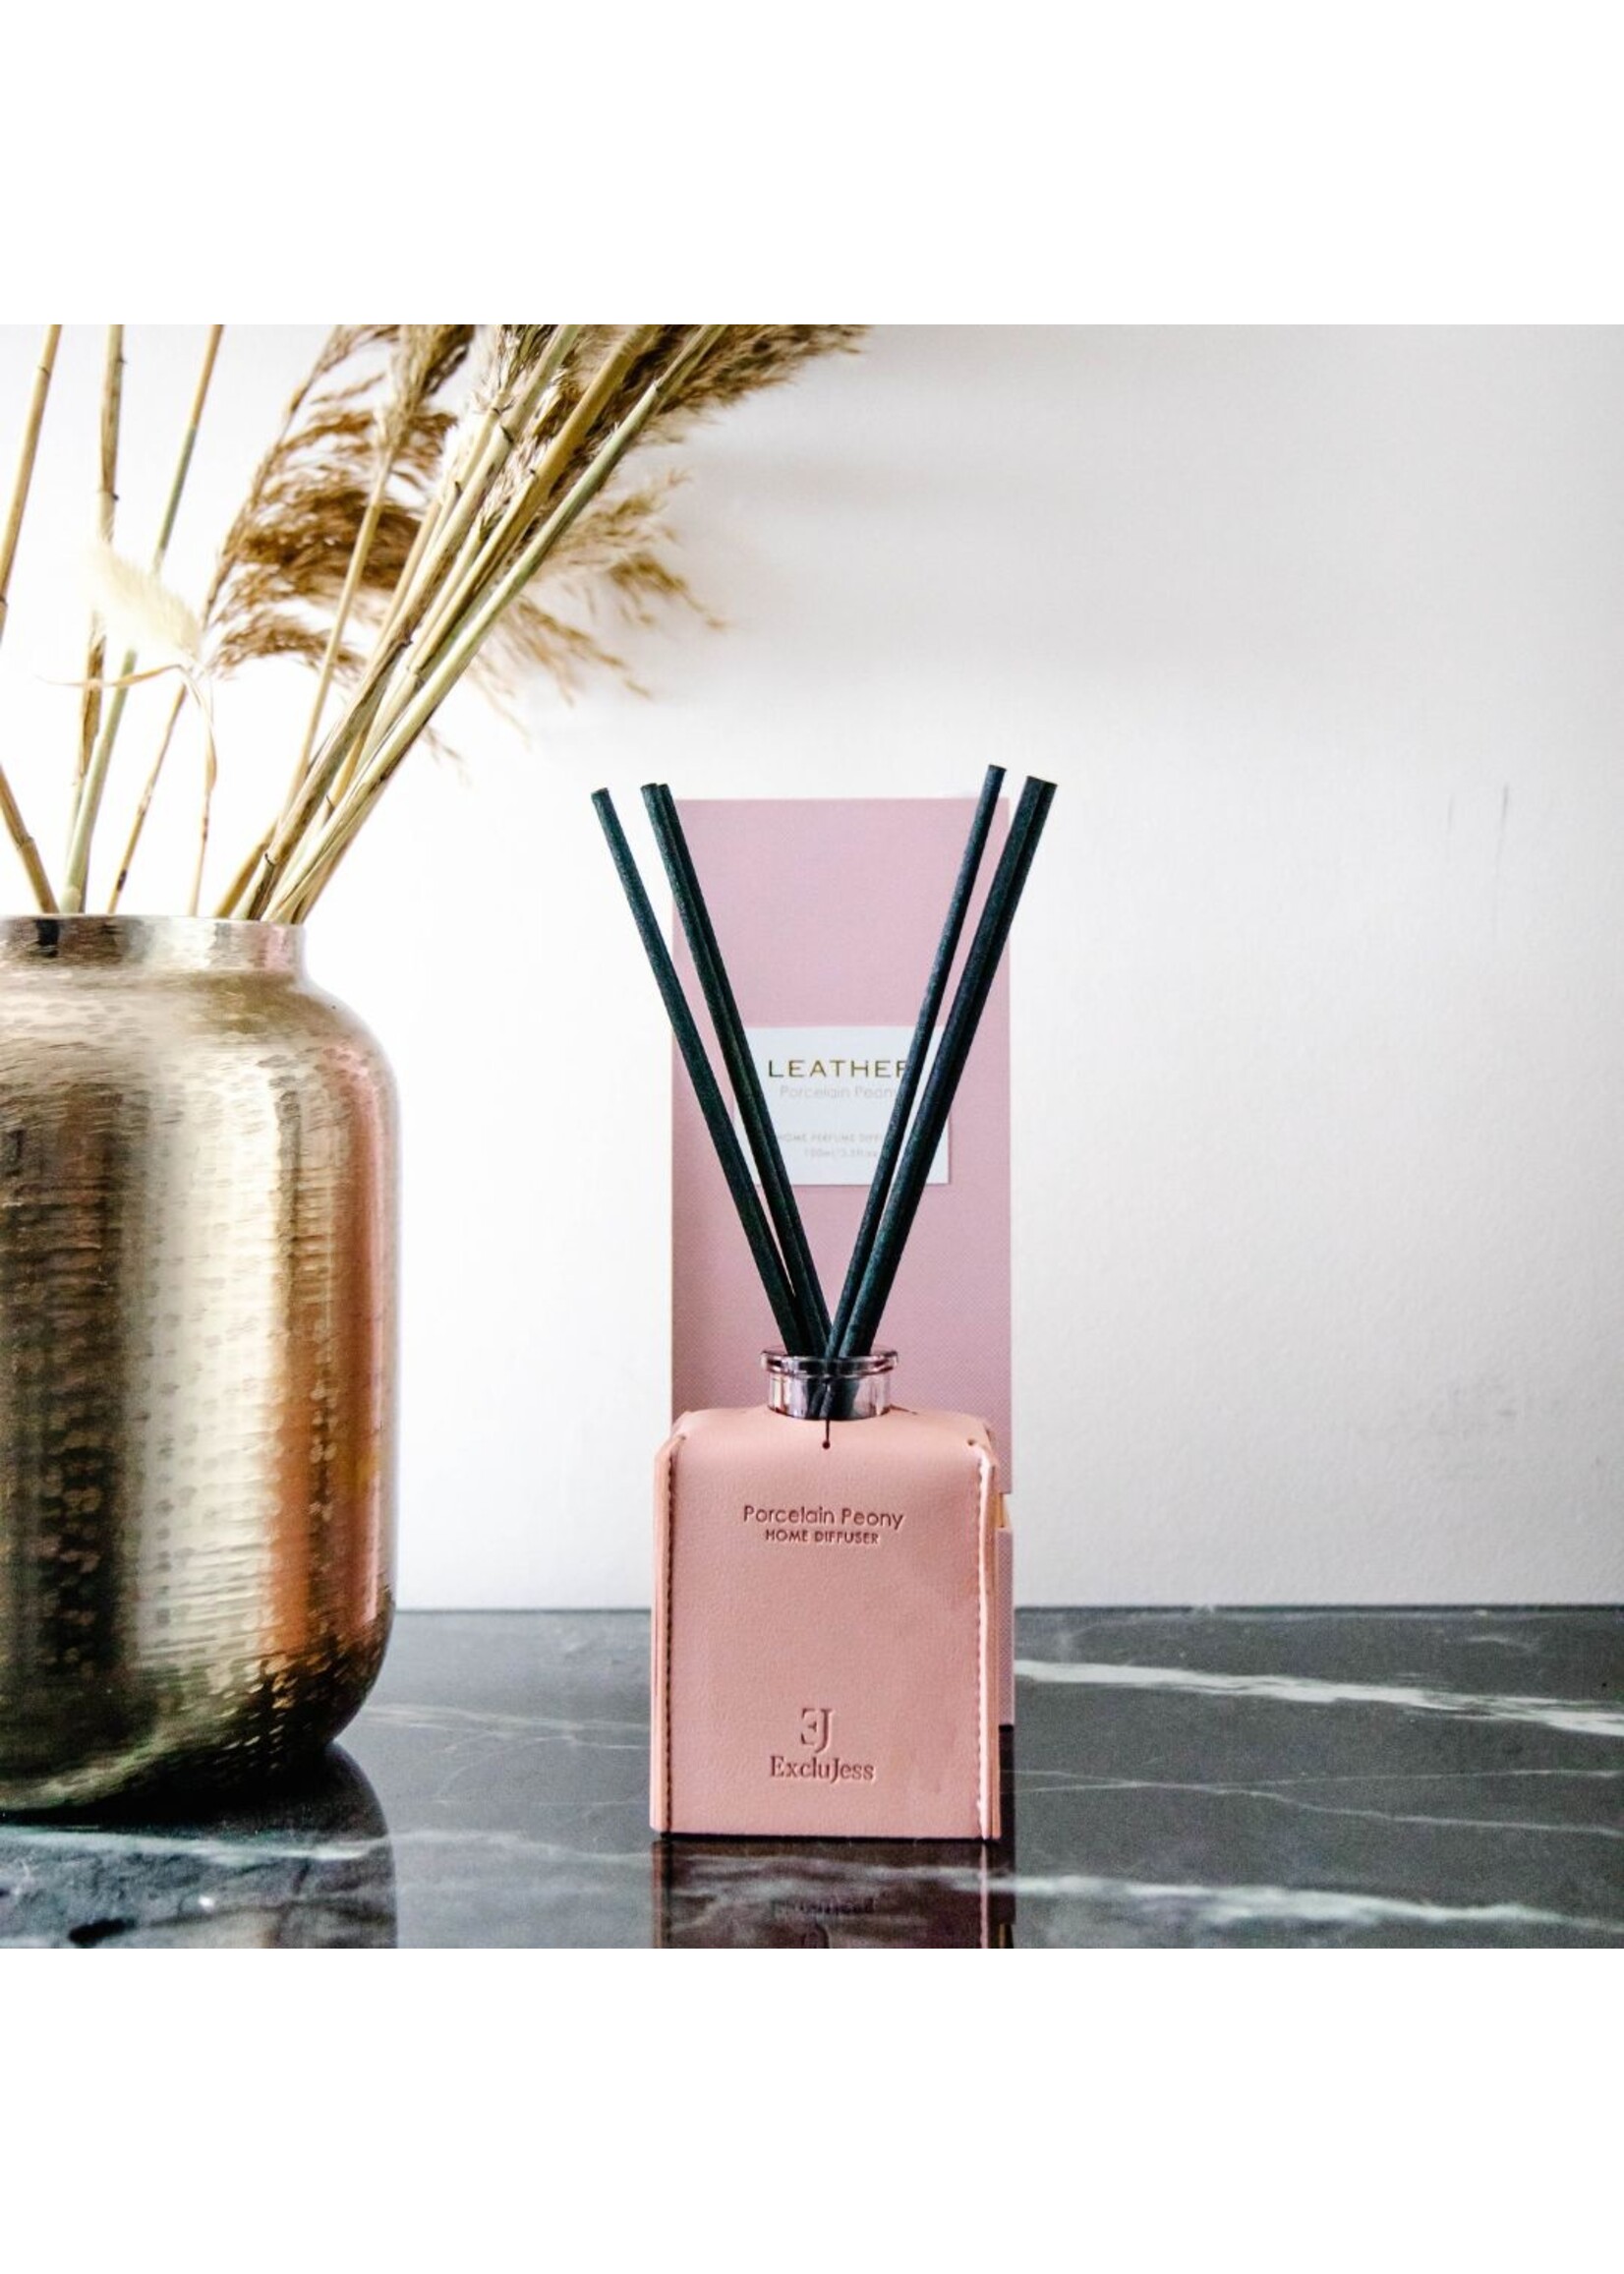 Pink leather porcelean peony diffuser